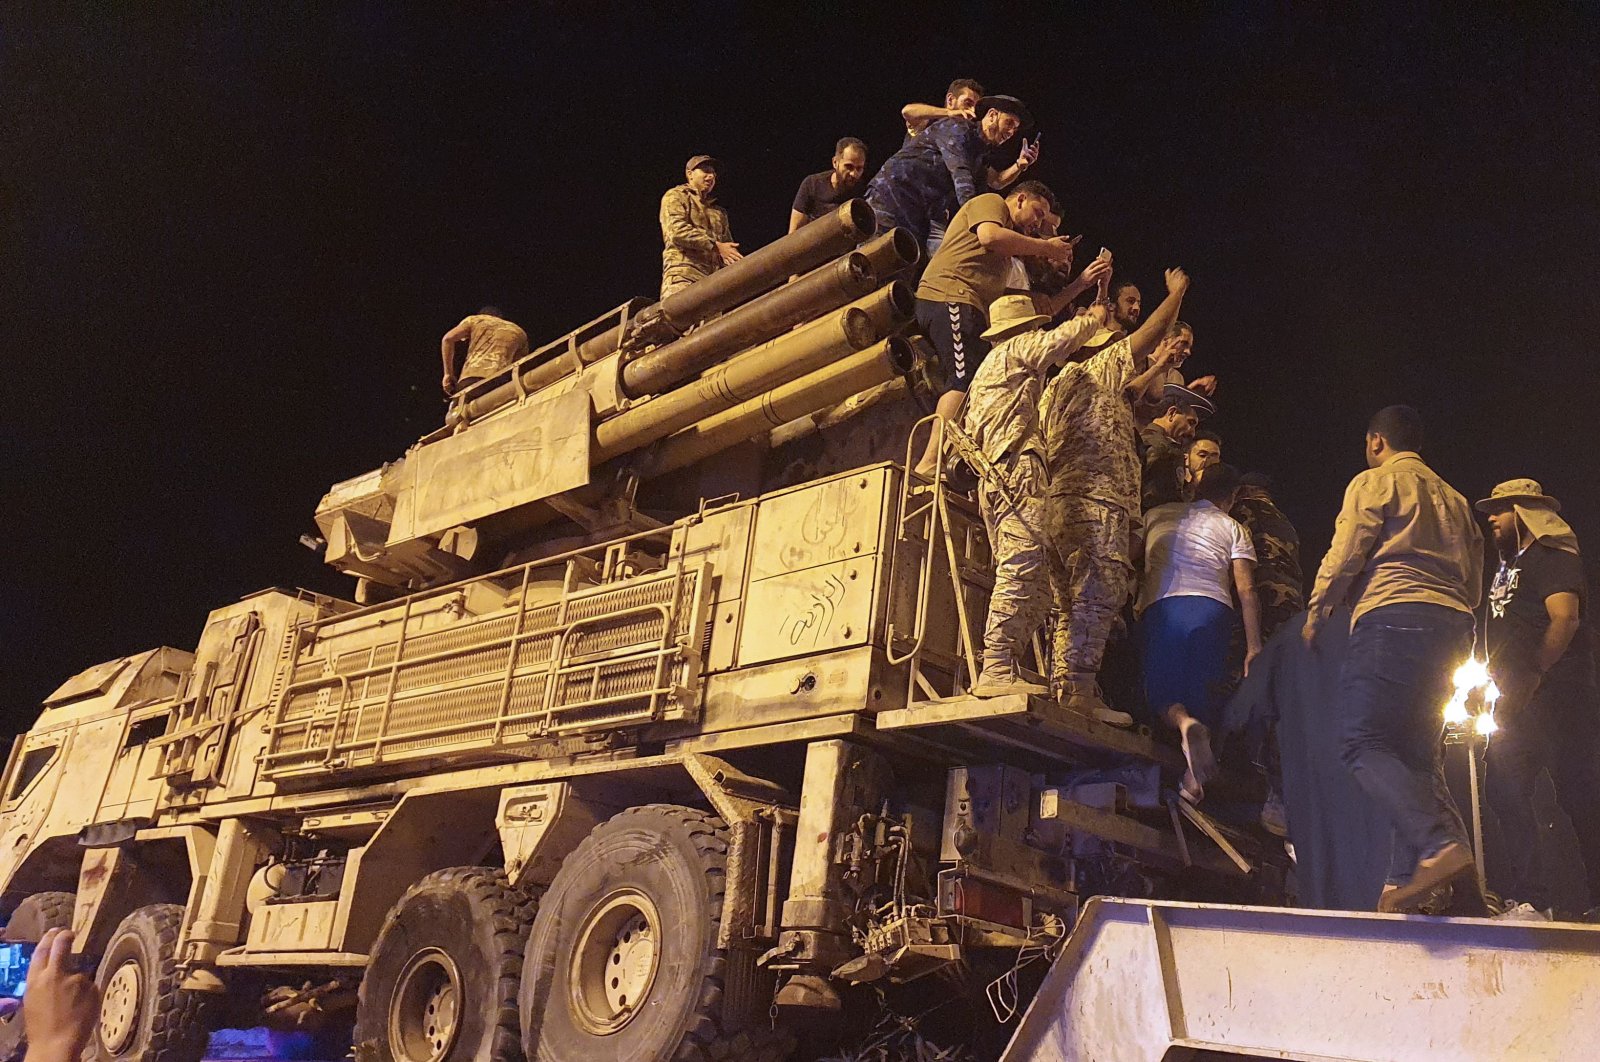 Forces loyal to Libya's UN-recognised Government of National Accord (GNA) parade a Pantsir air defense system truck in the capital Tripoli on May 20, 2020. (AFP Photo)